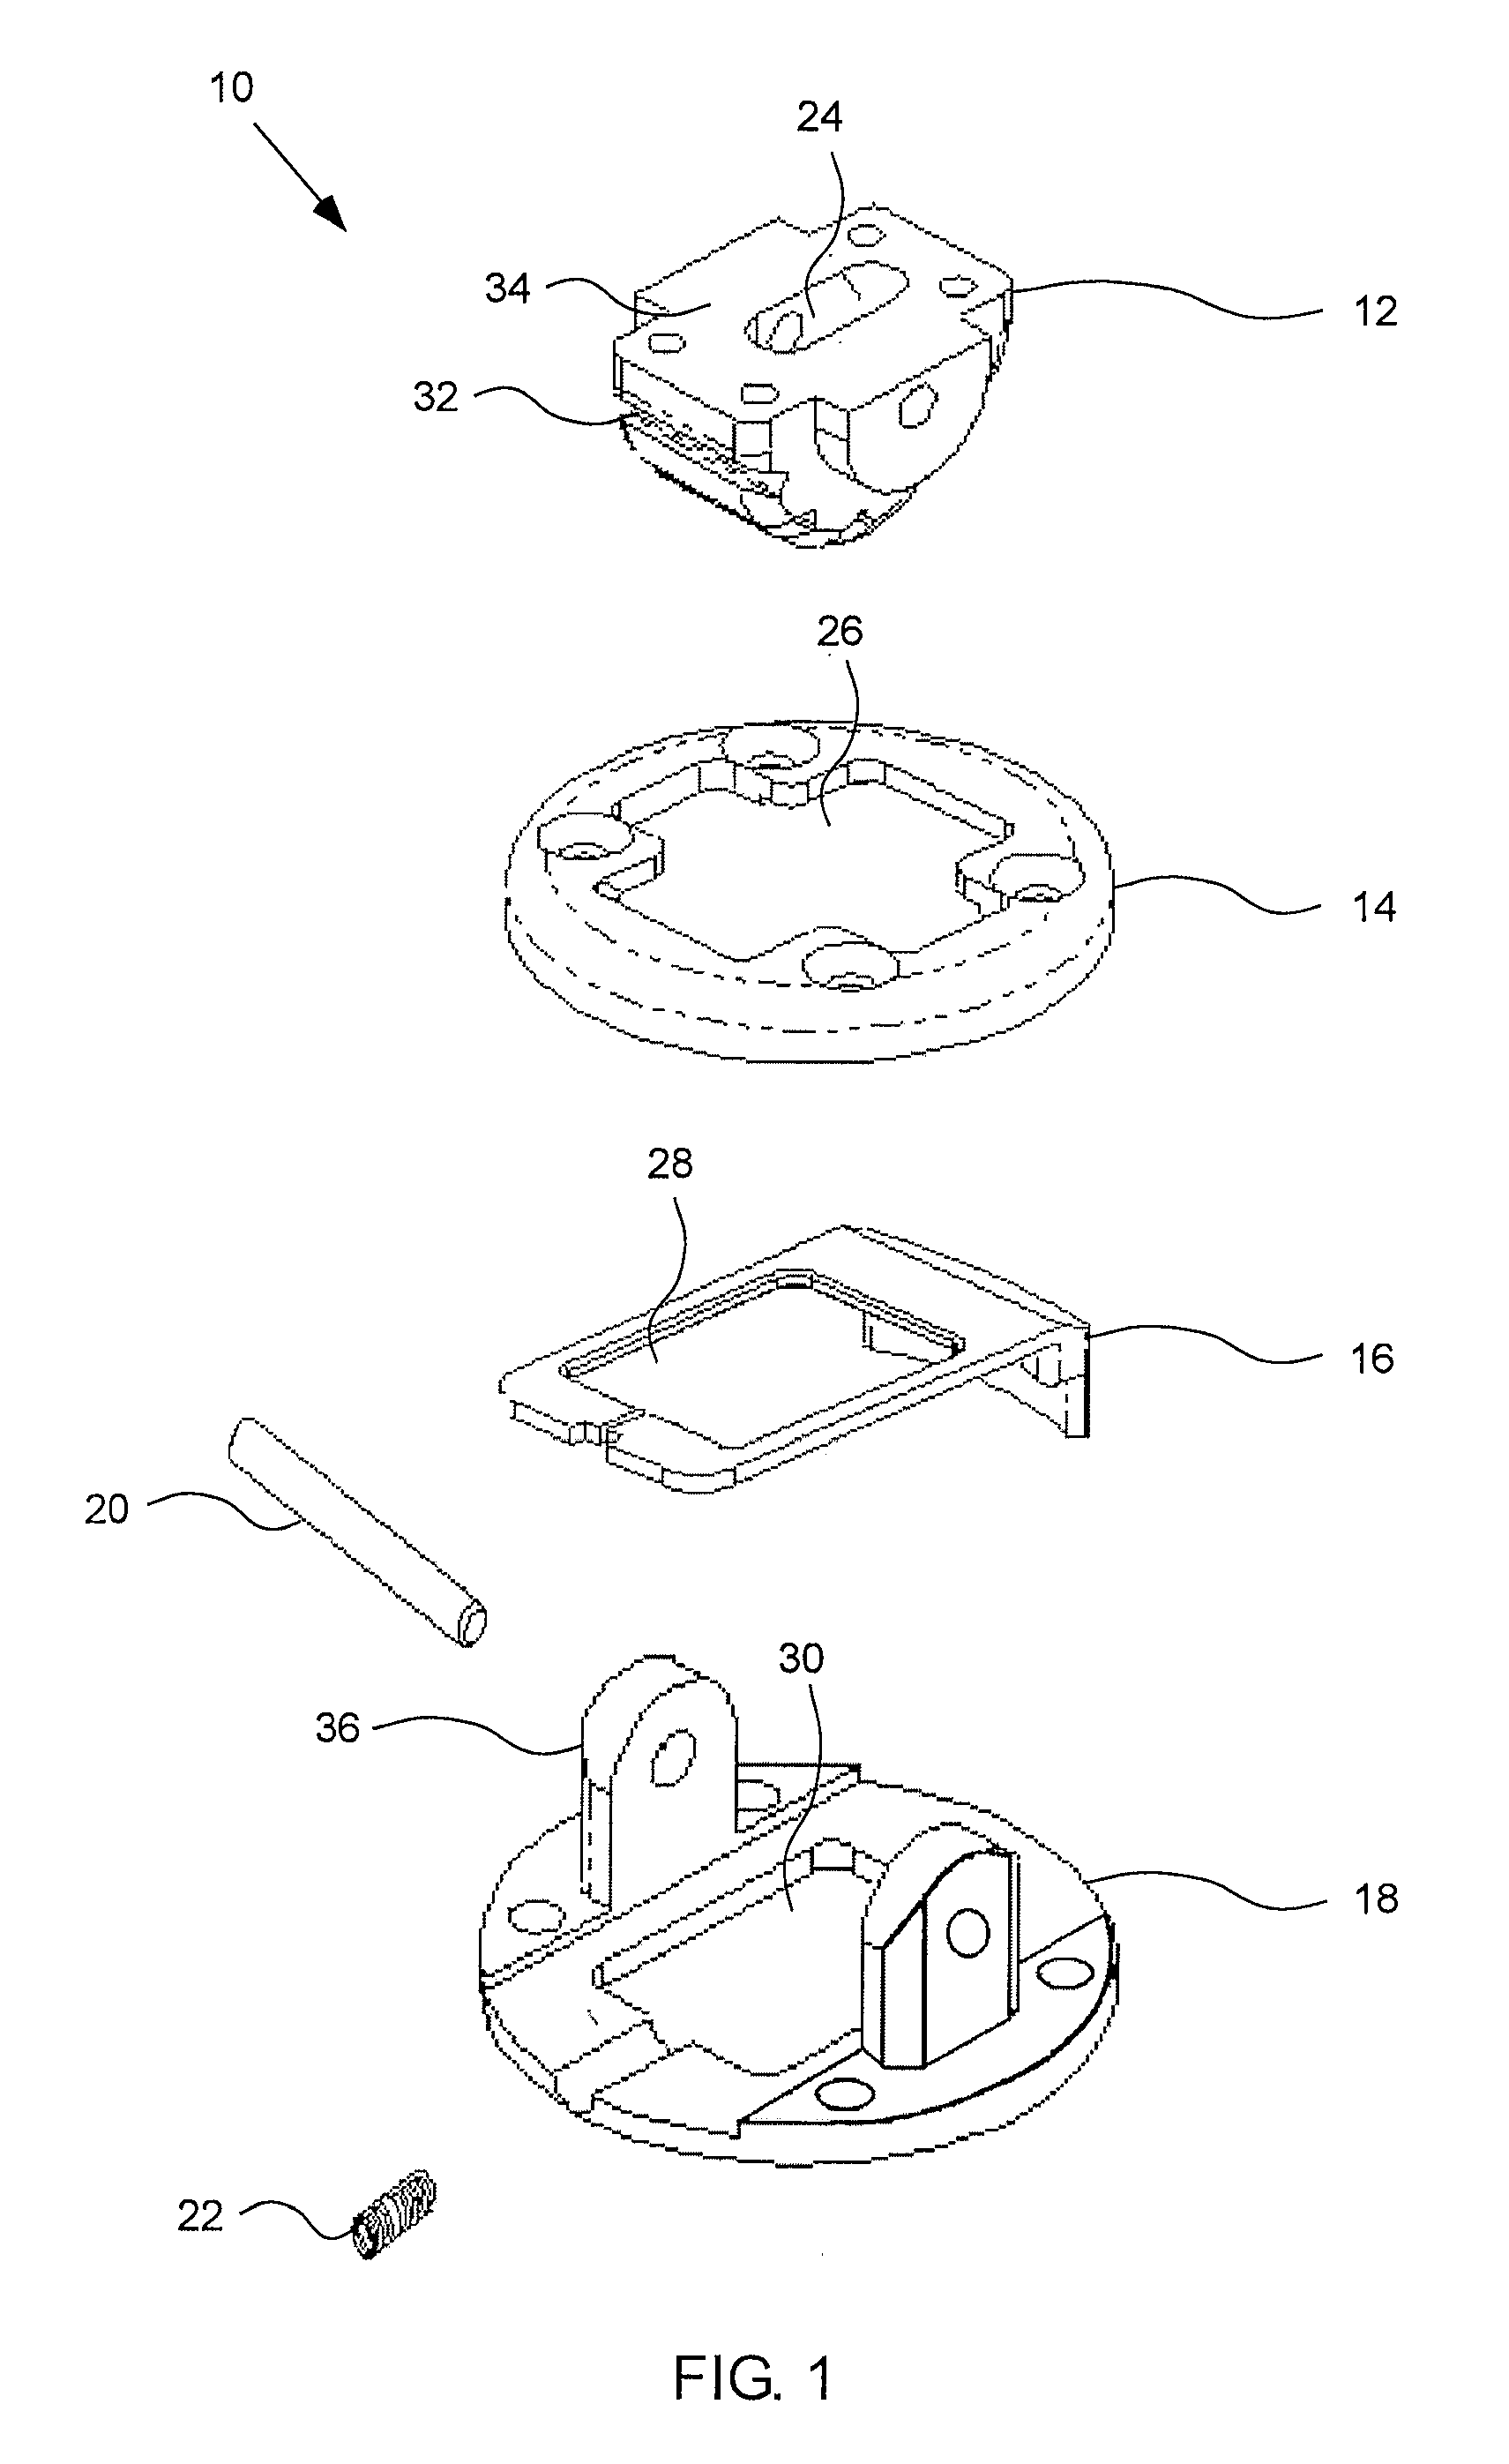 Wrist device for use with a prosthetic limb